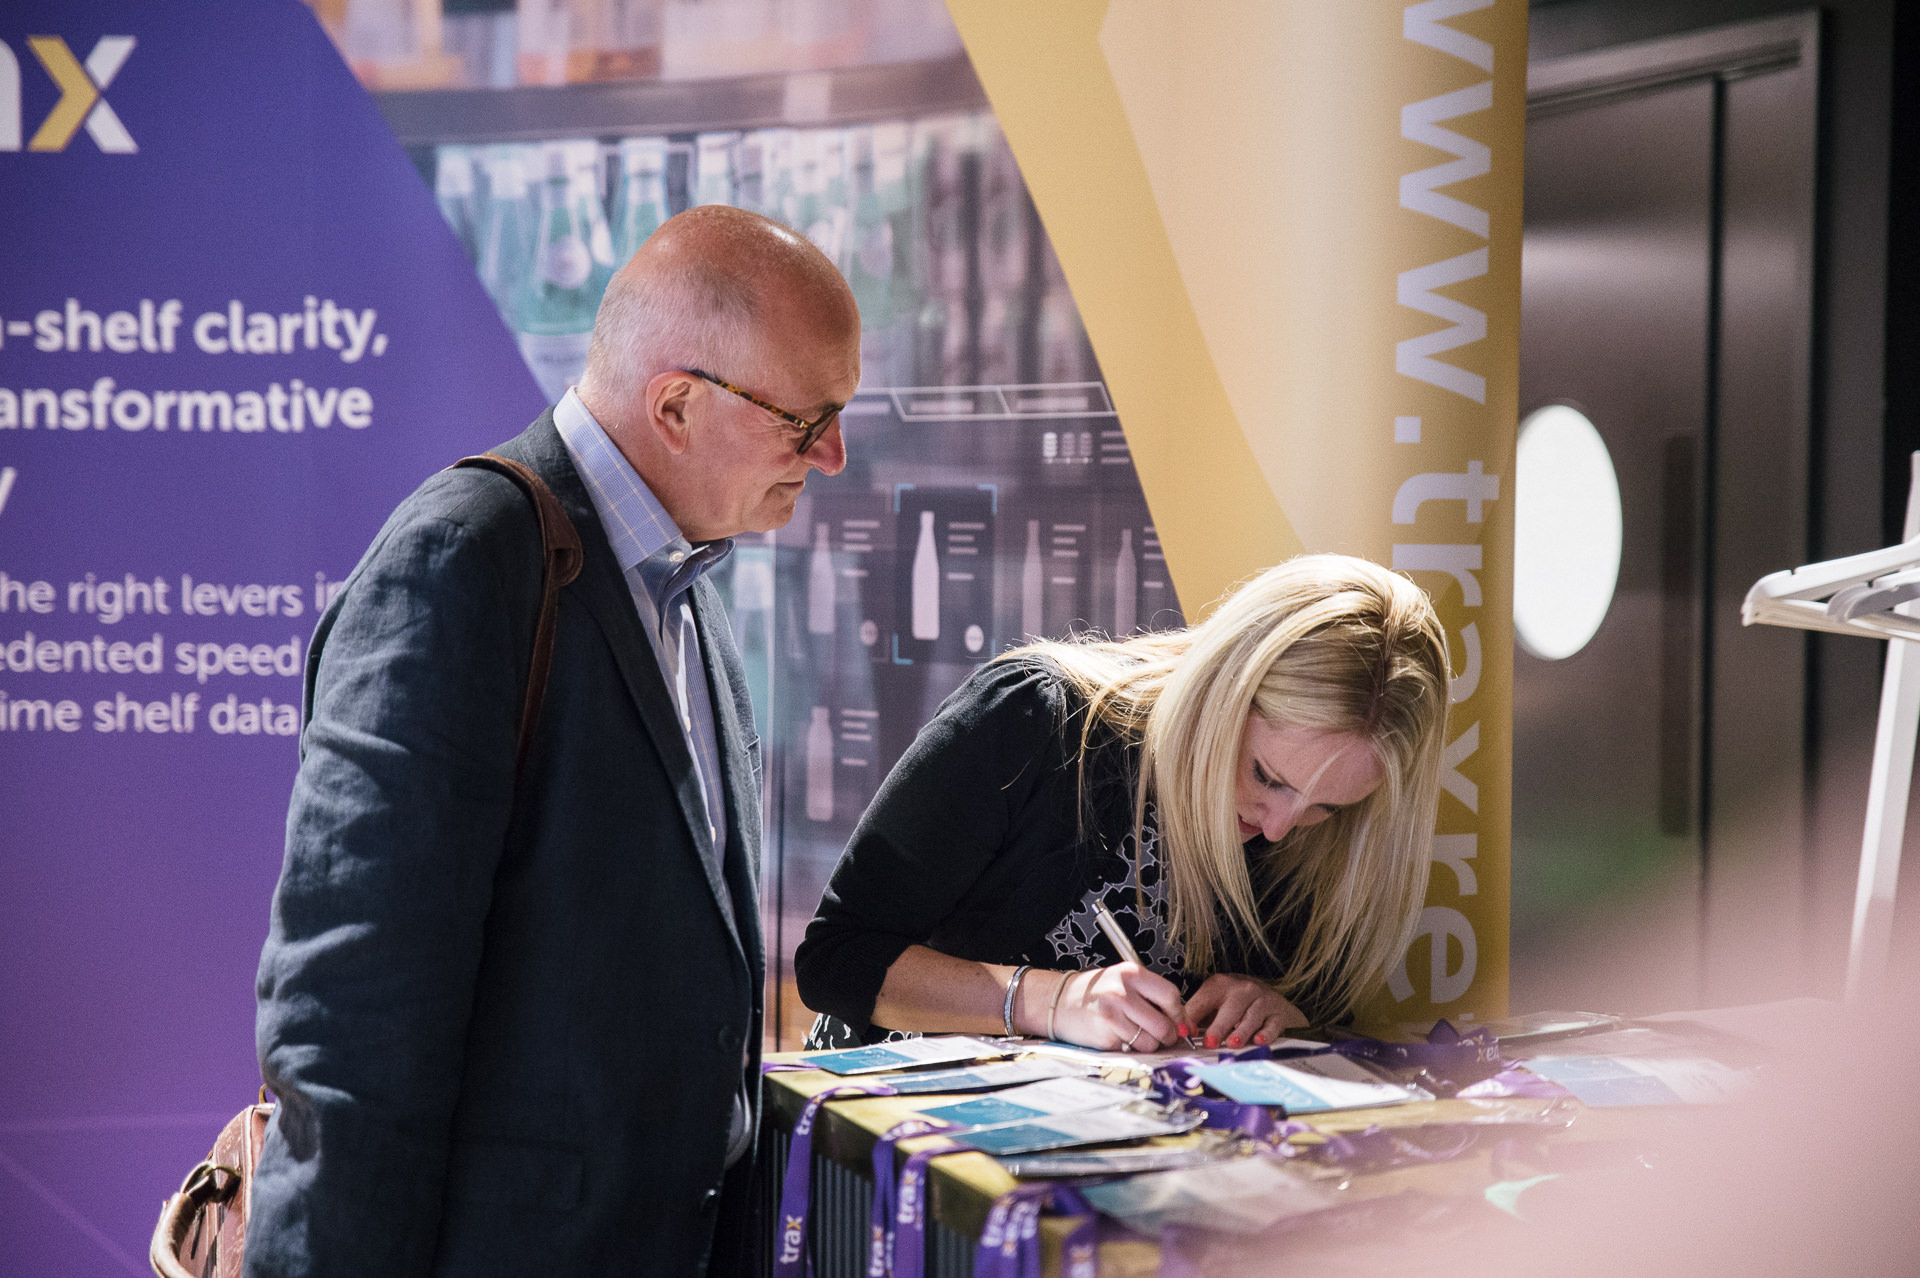 trax innovation day london 2019 guest signing in